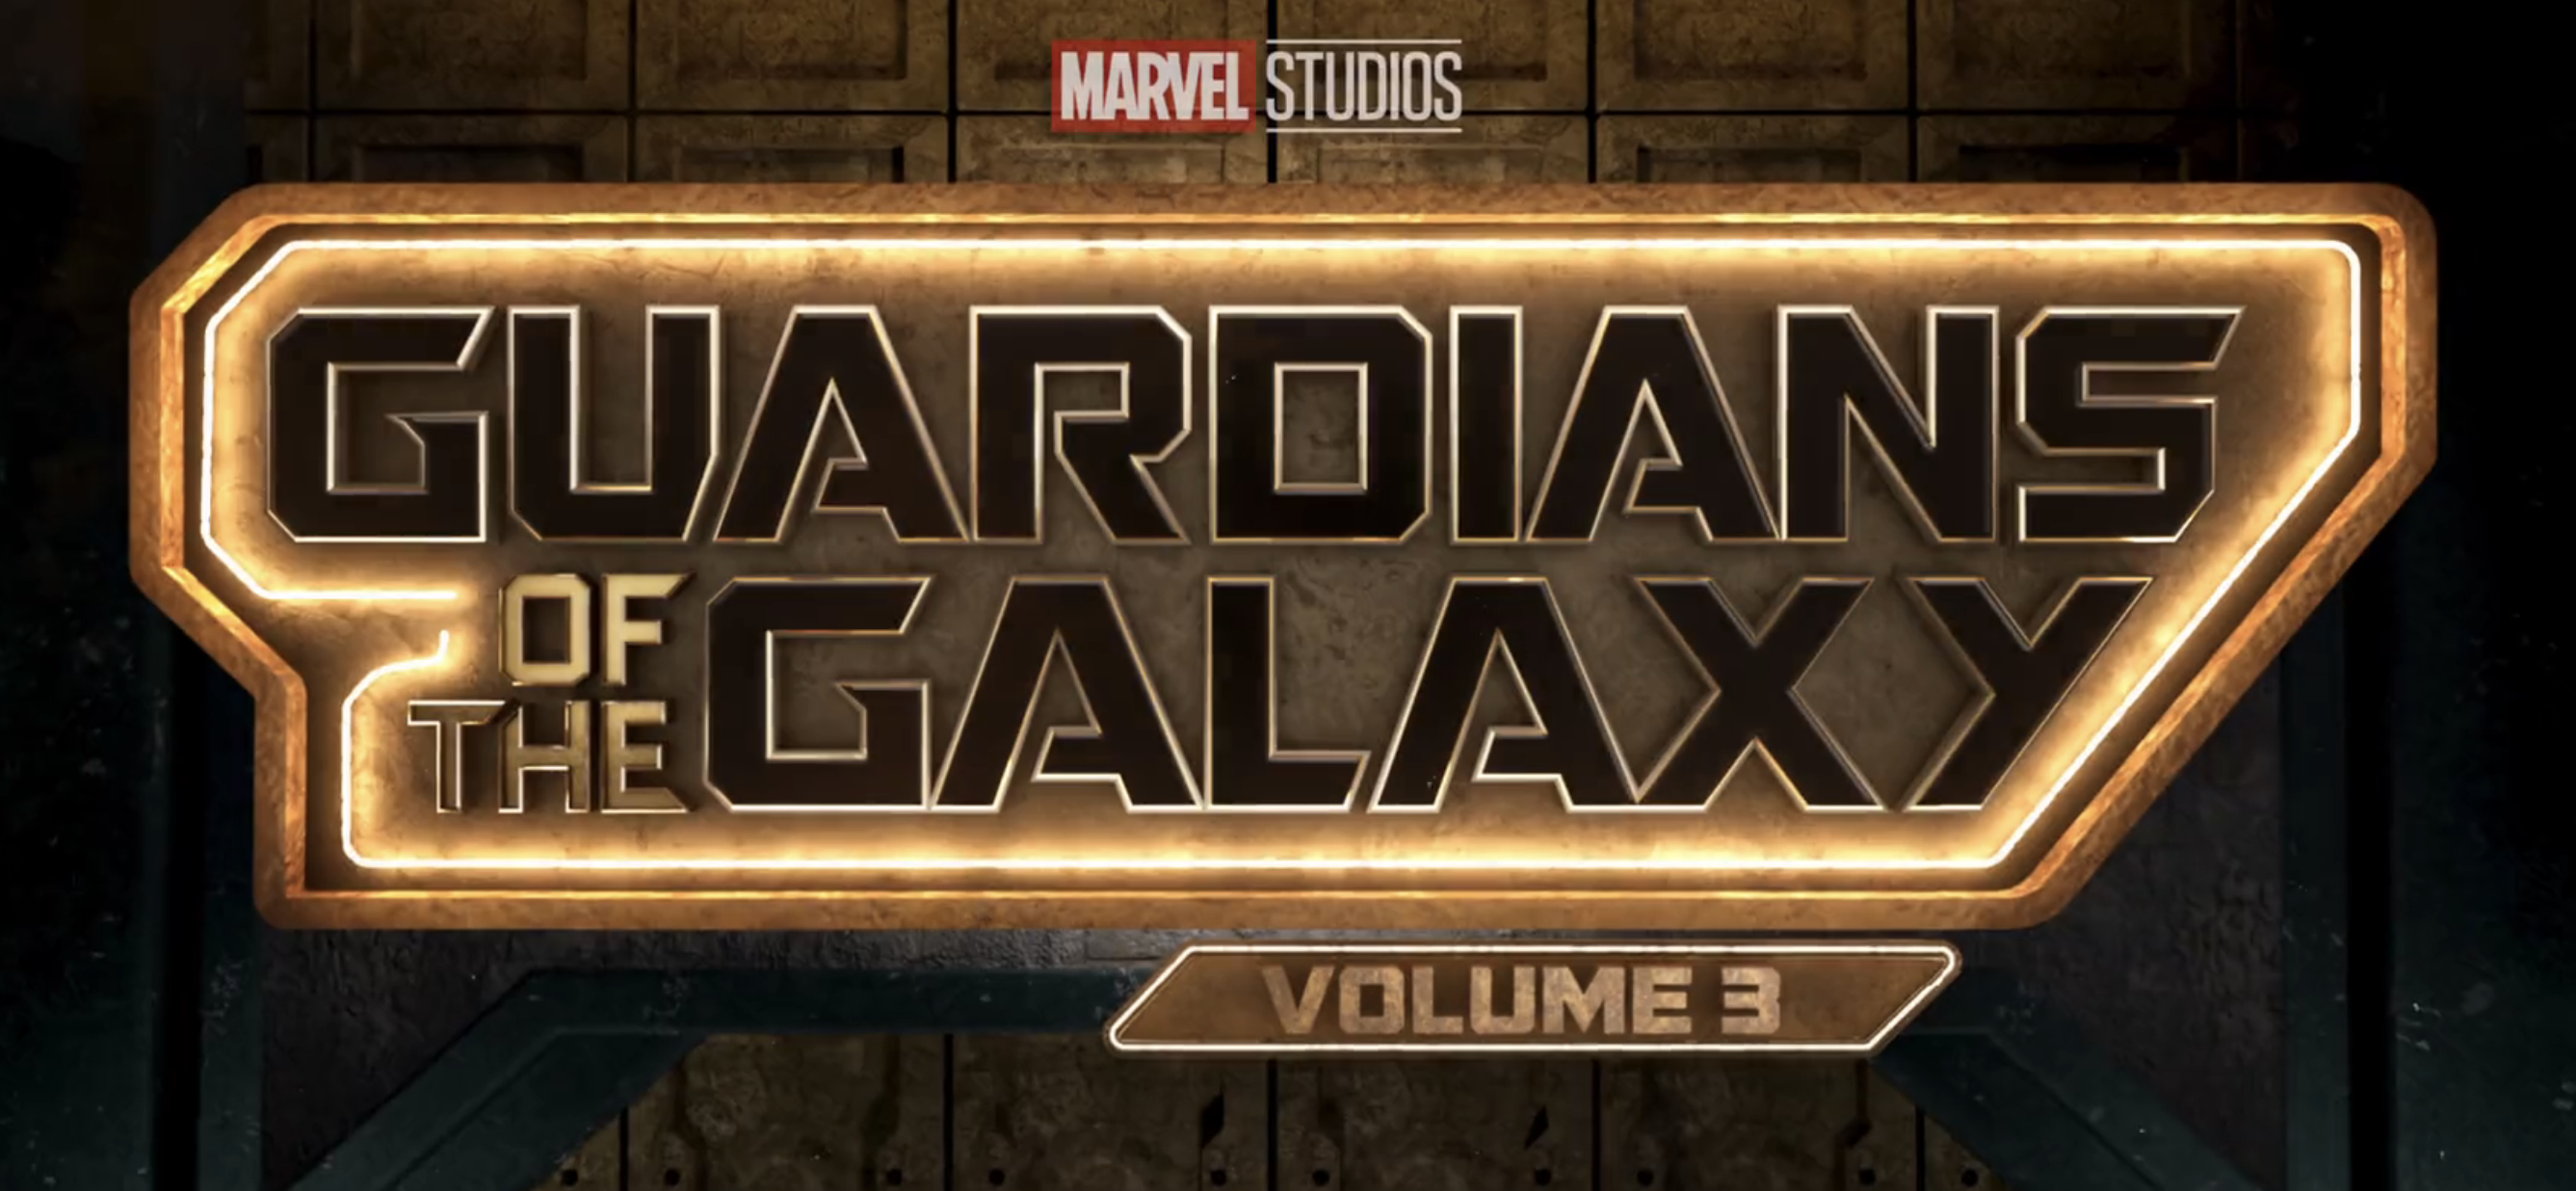 SEE IT: The New Trailer For ‘Guardians of the Galaxy Vol. 3’ Is Here